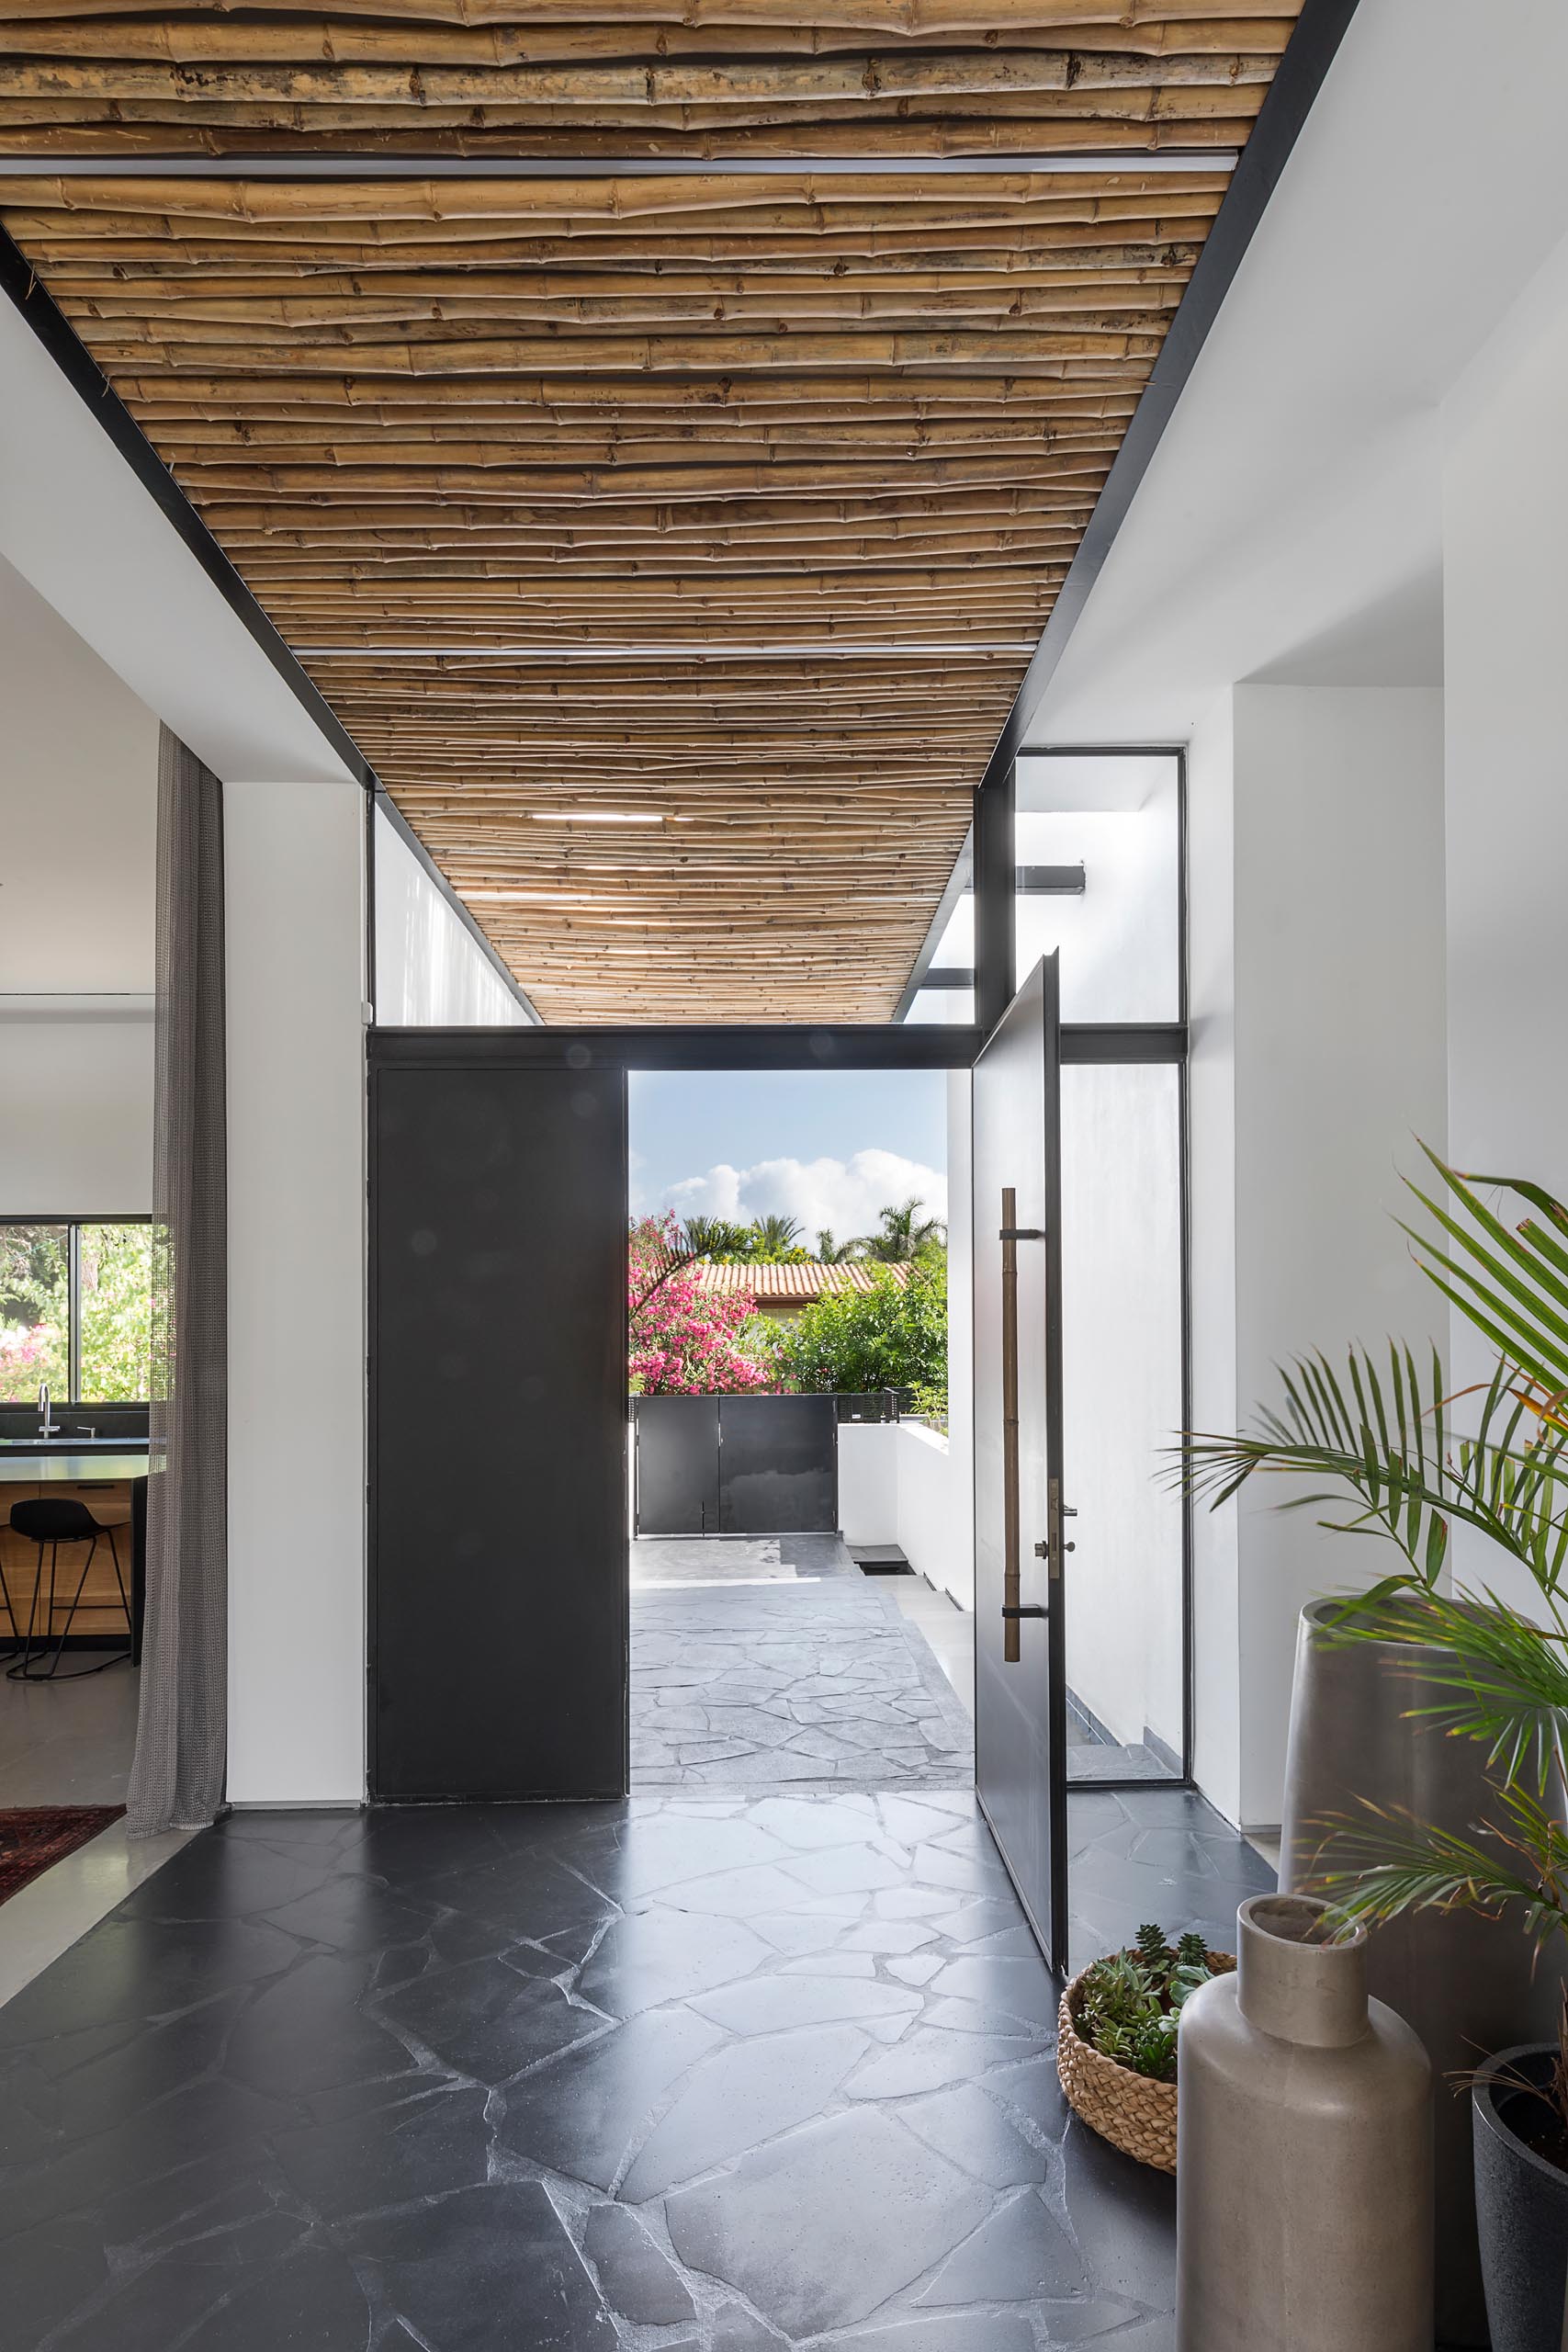 This modern bamboo screens act as a rain cover for the black front door, and flow through to the interior of the home, and then onto the backyard.